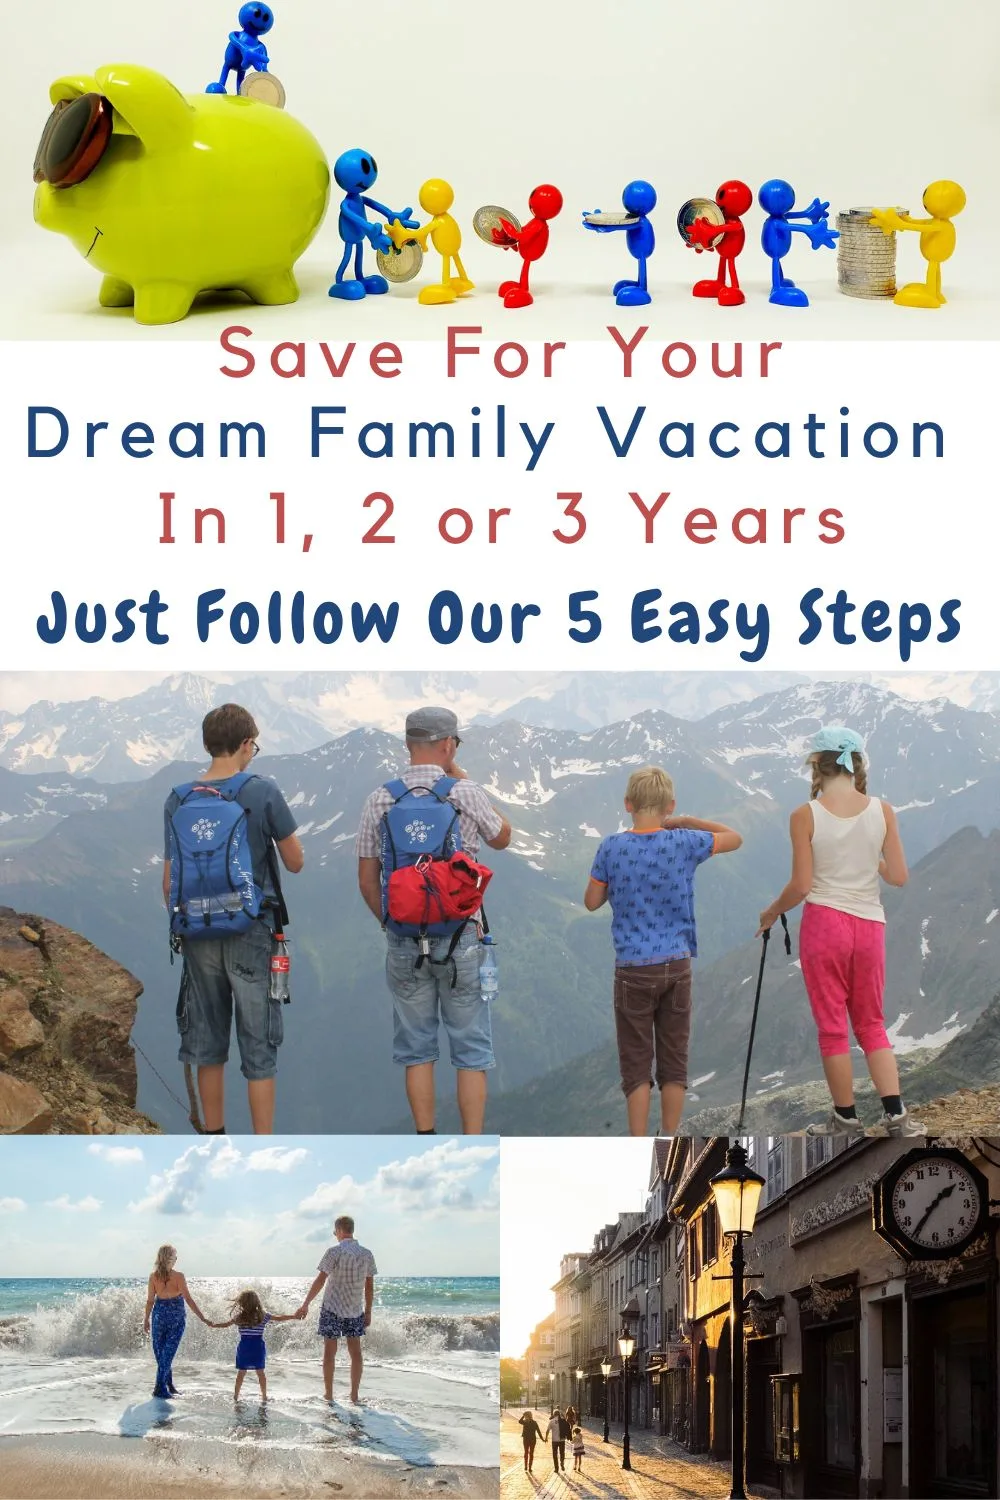 how to save for your dream vacation in 1, 2 or 3 years in 5 easy steps.